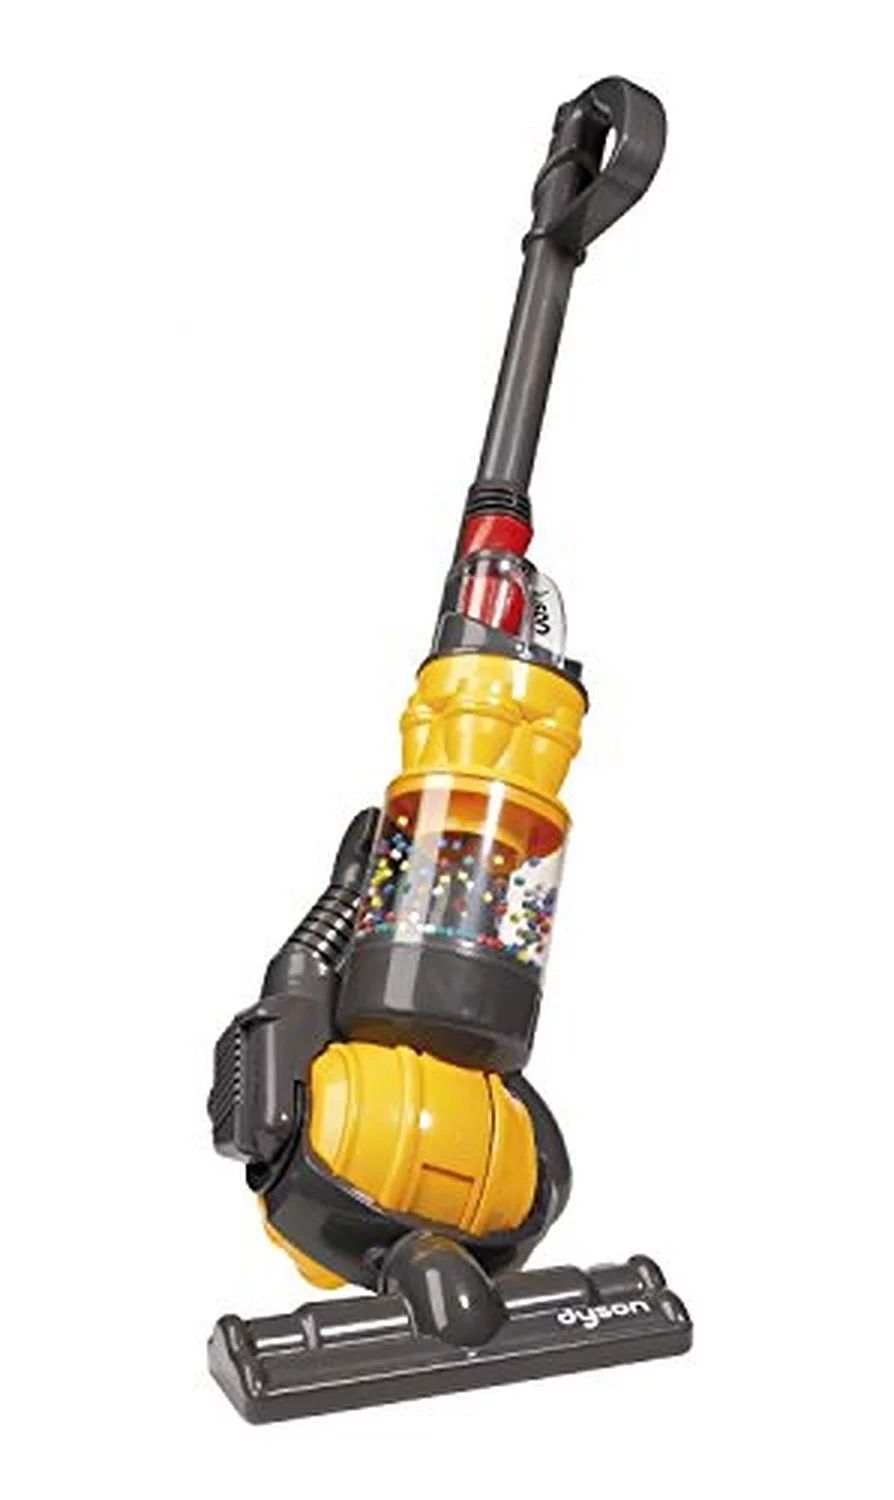 Toy Vacuum- Dyson Ball Vacuum With Real Suction and Sounds | Walmart (US)